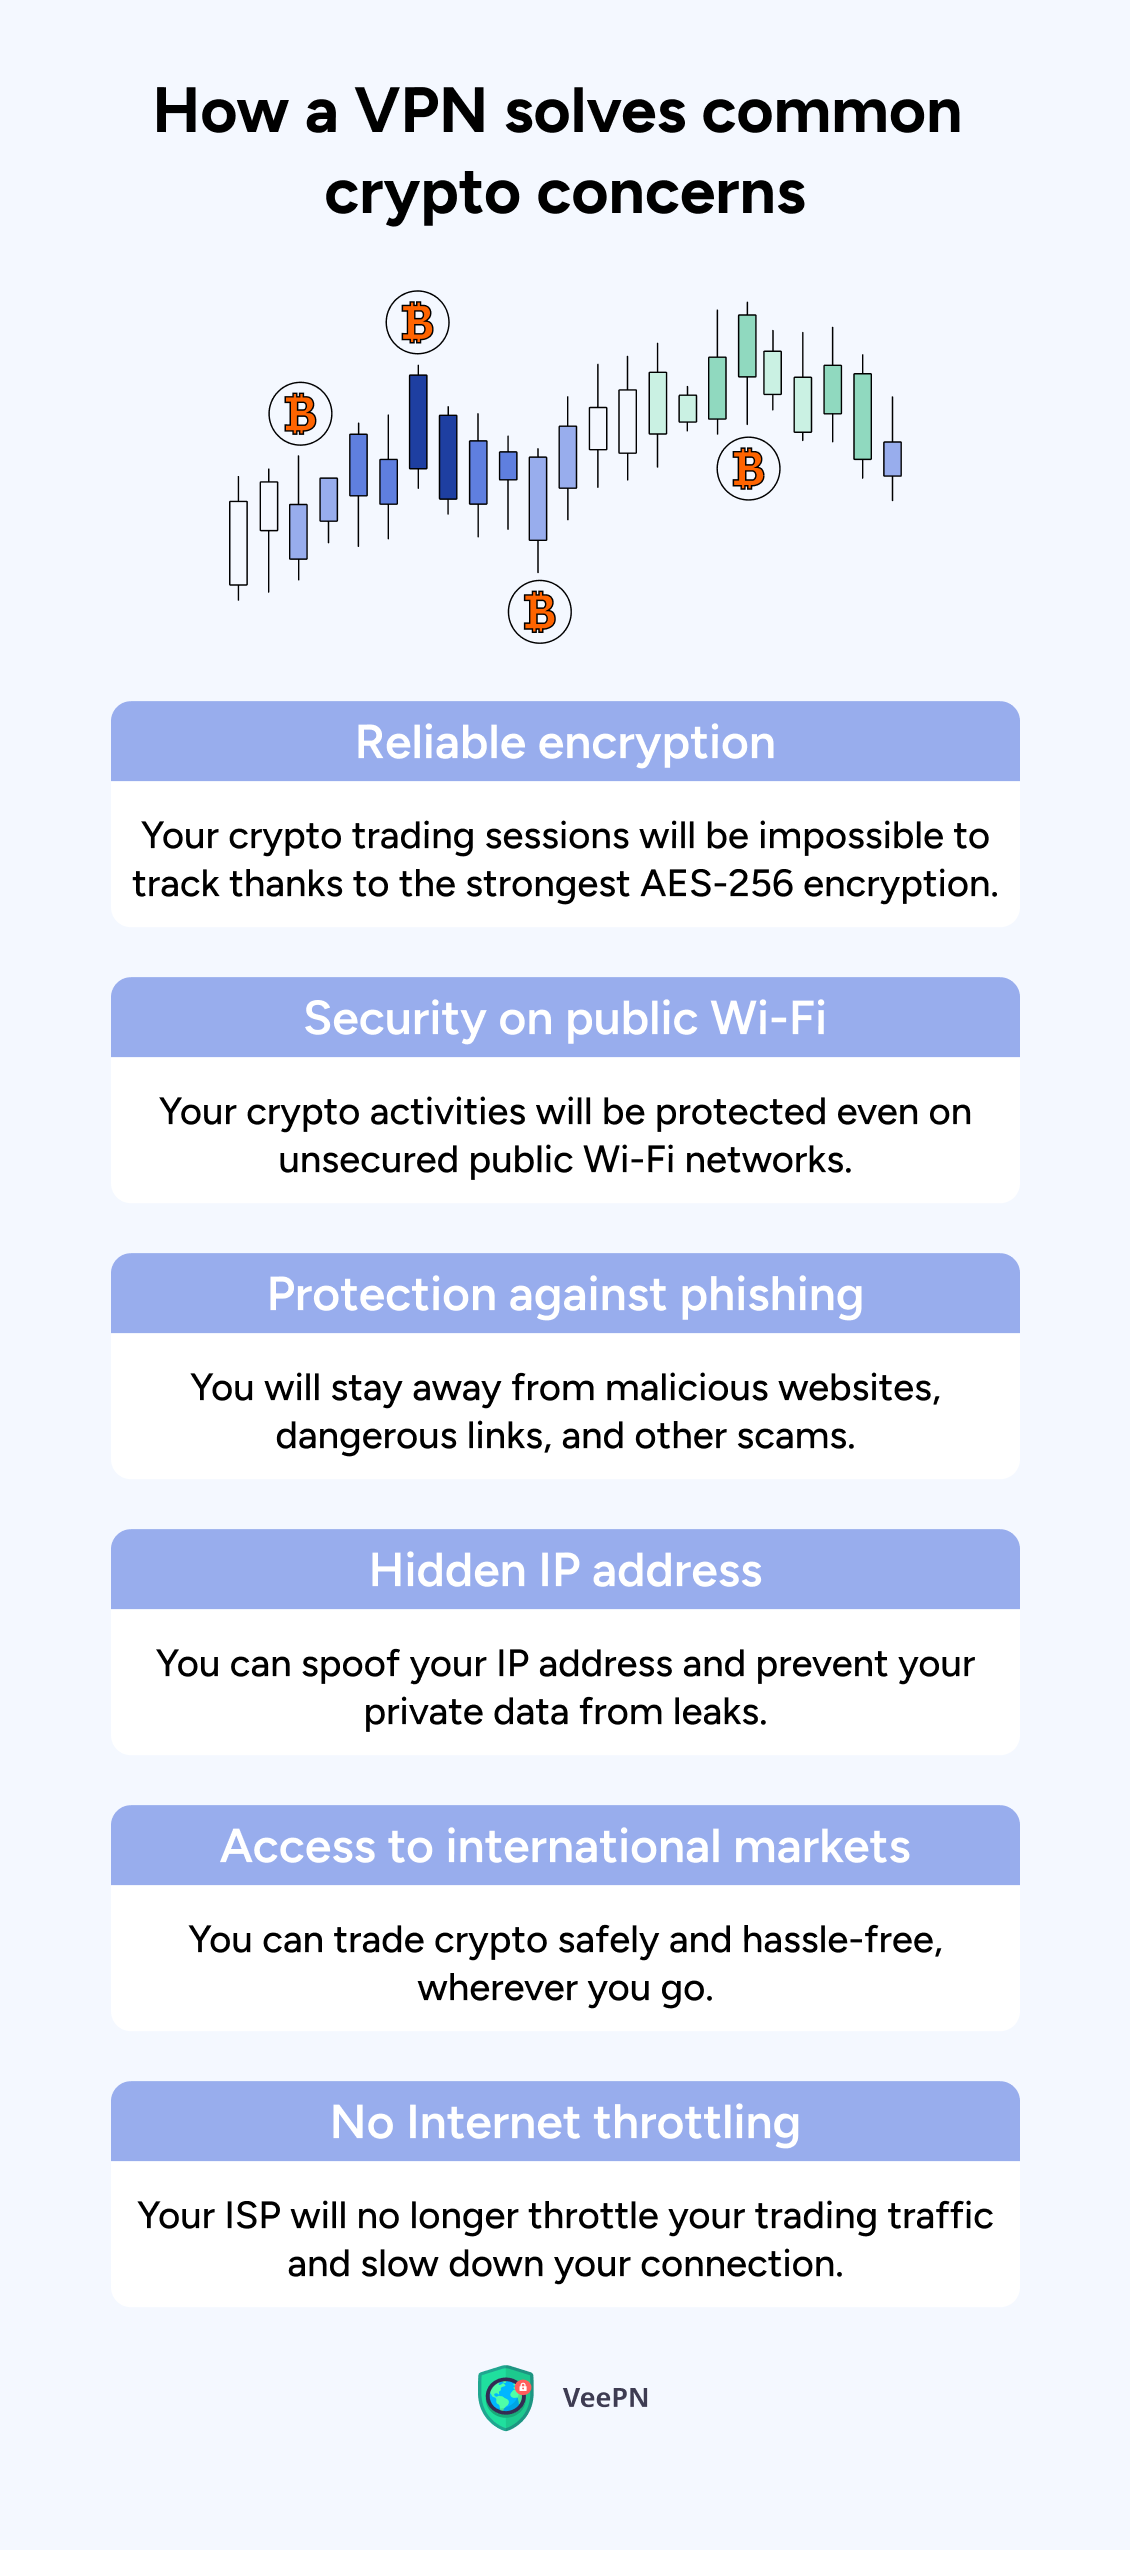 Why do you need a crypto VPN: for online security, privacy, access to international markets, and no Internet throttling